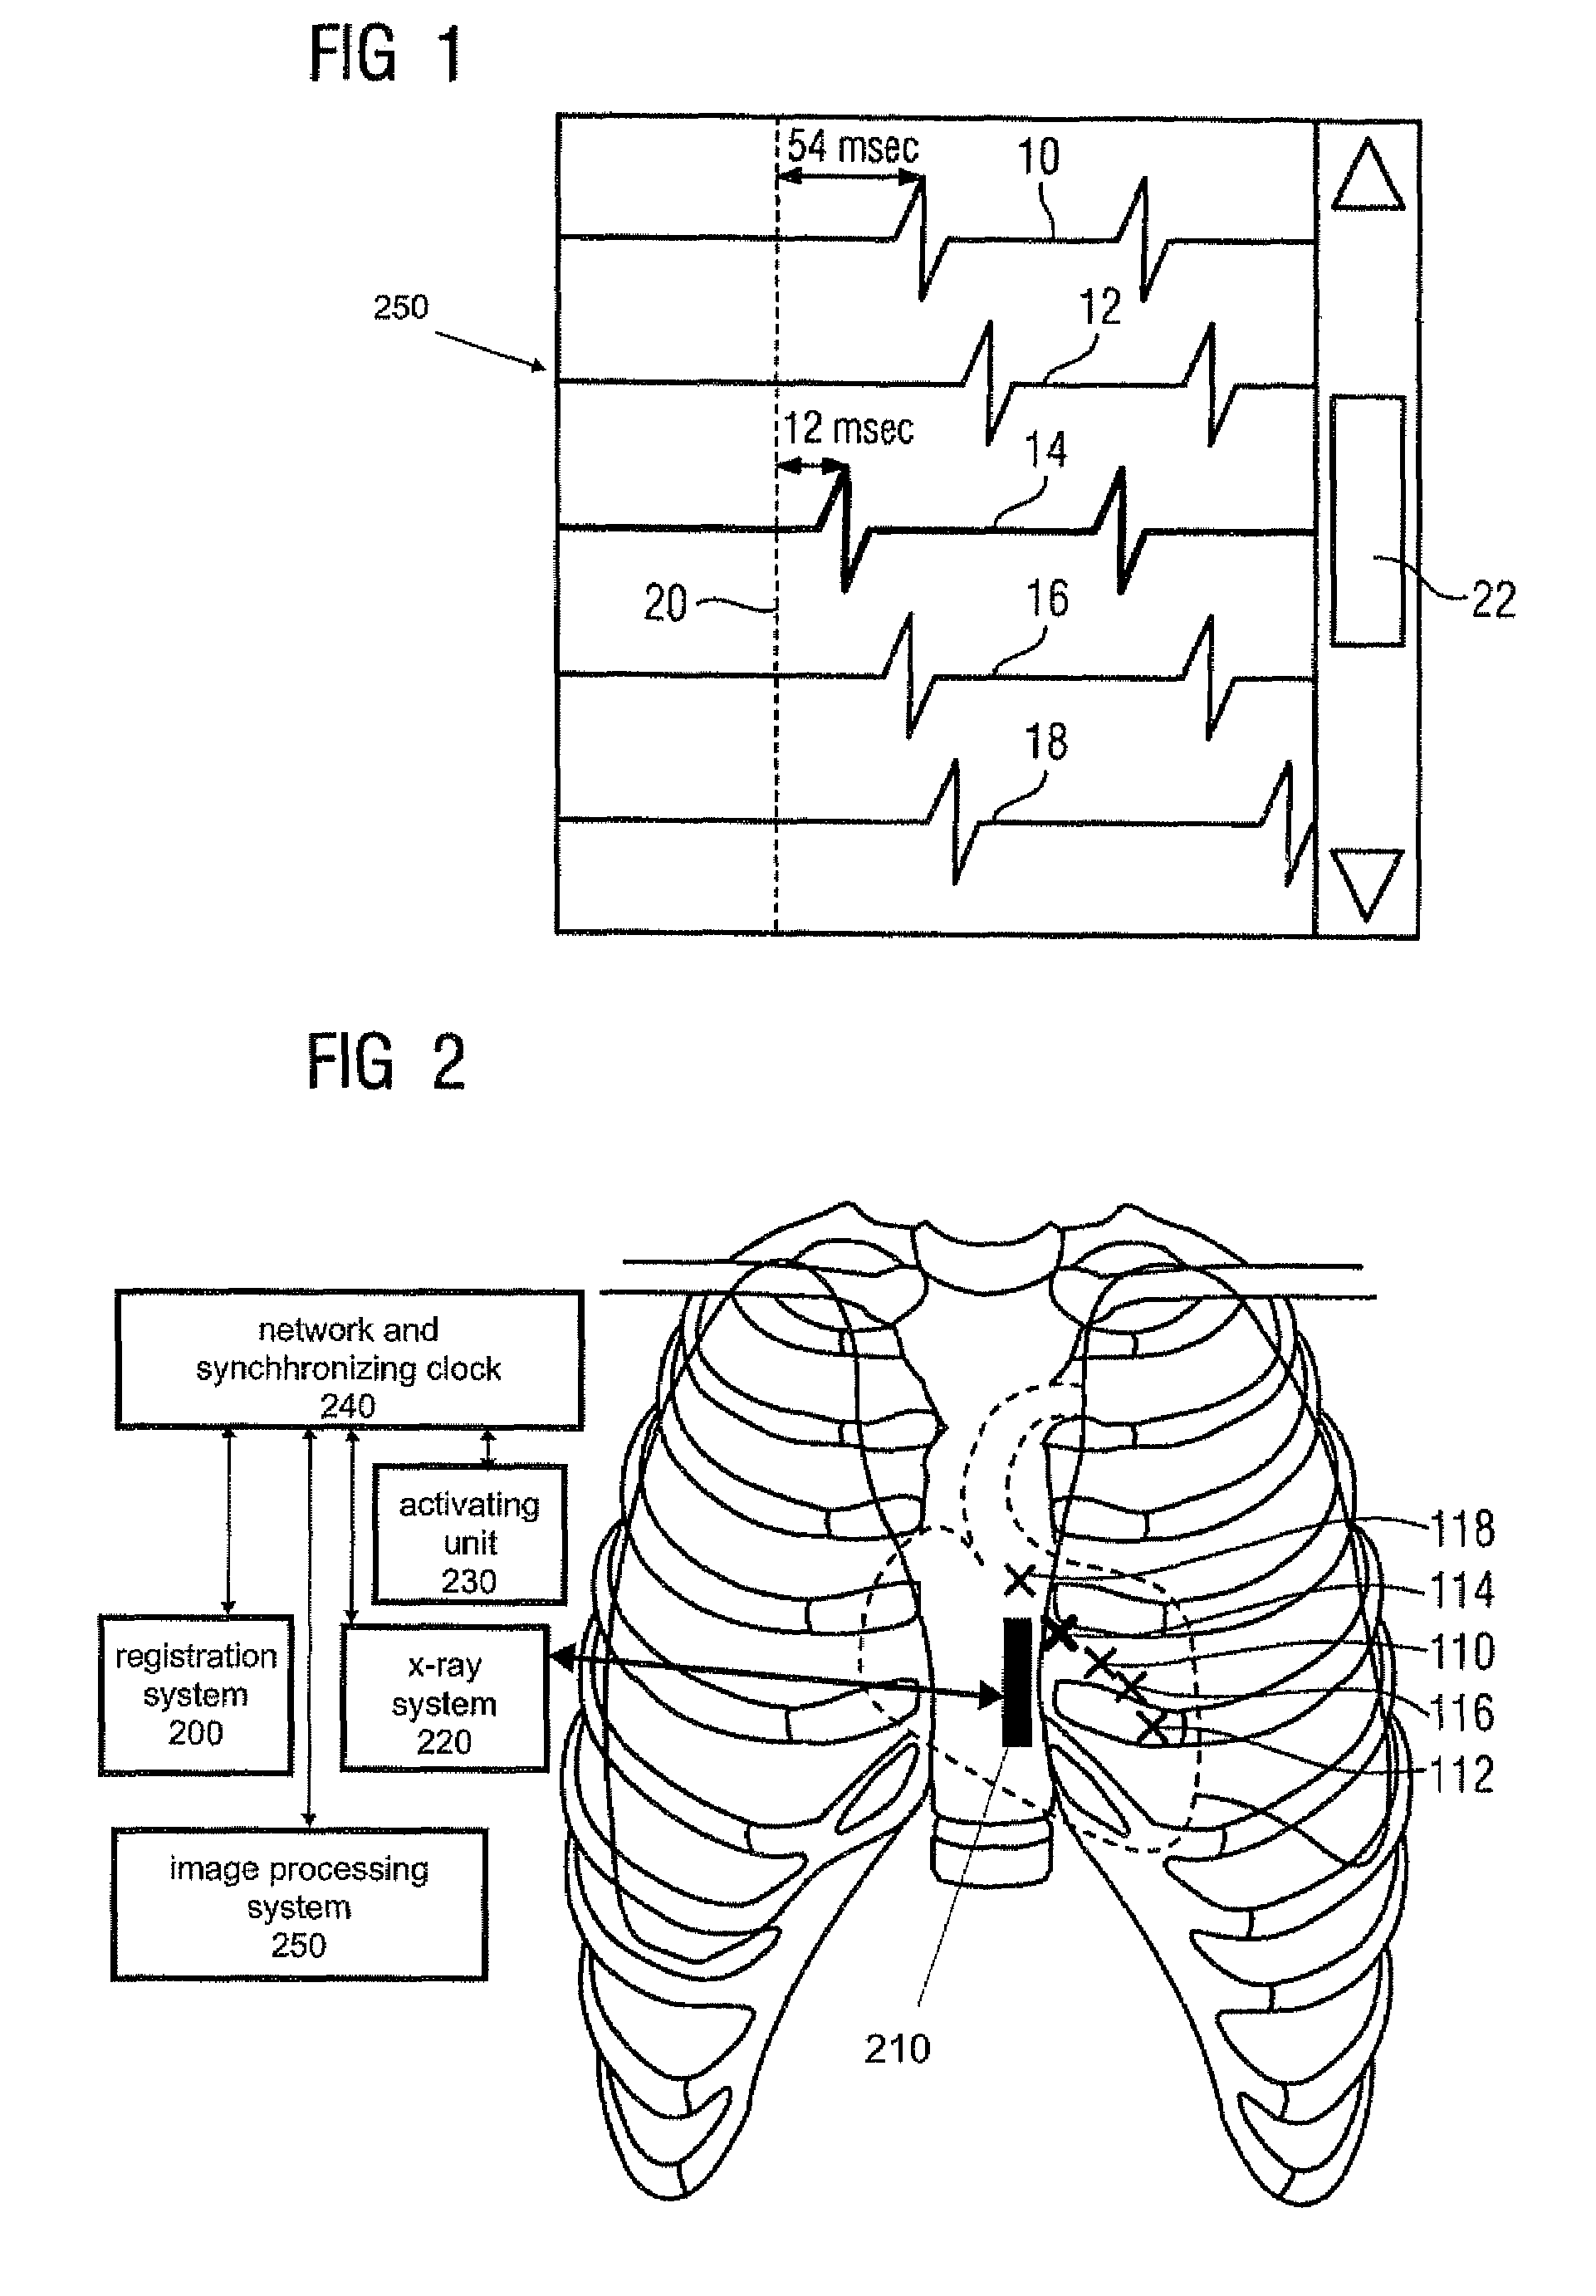 Method and system for concurrent localization and display of a surgical catheter and local electrophysiological potential curves